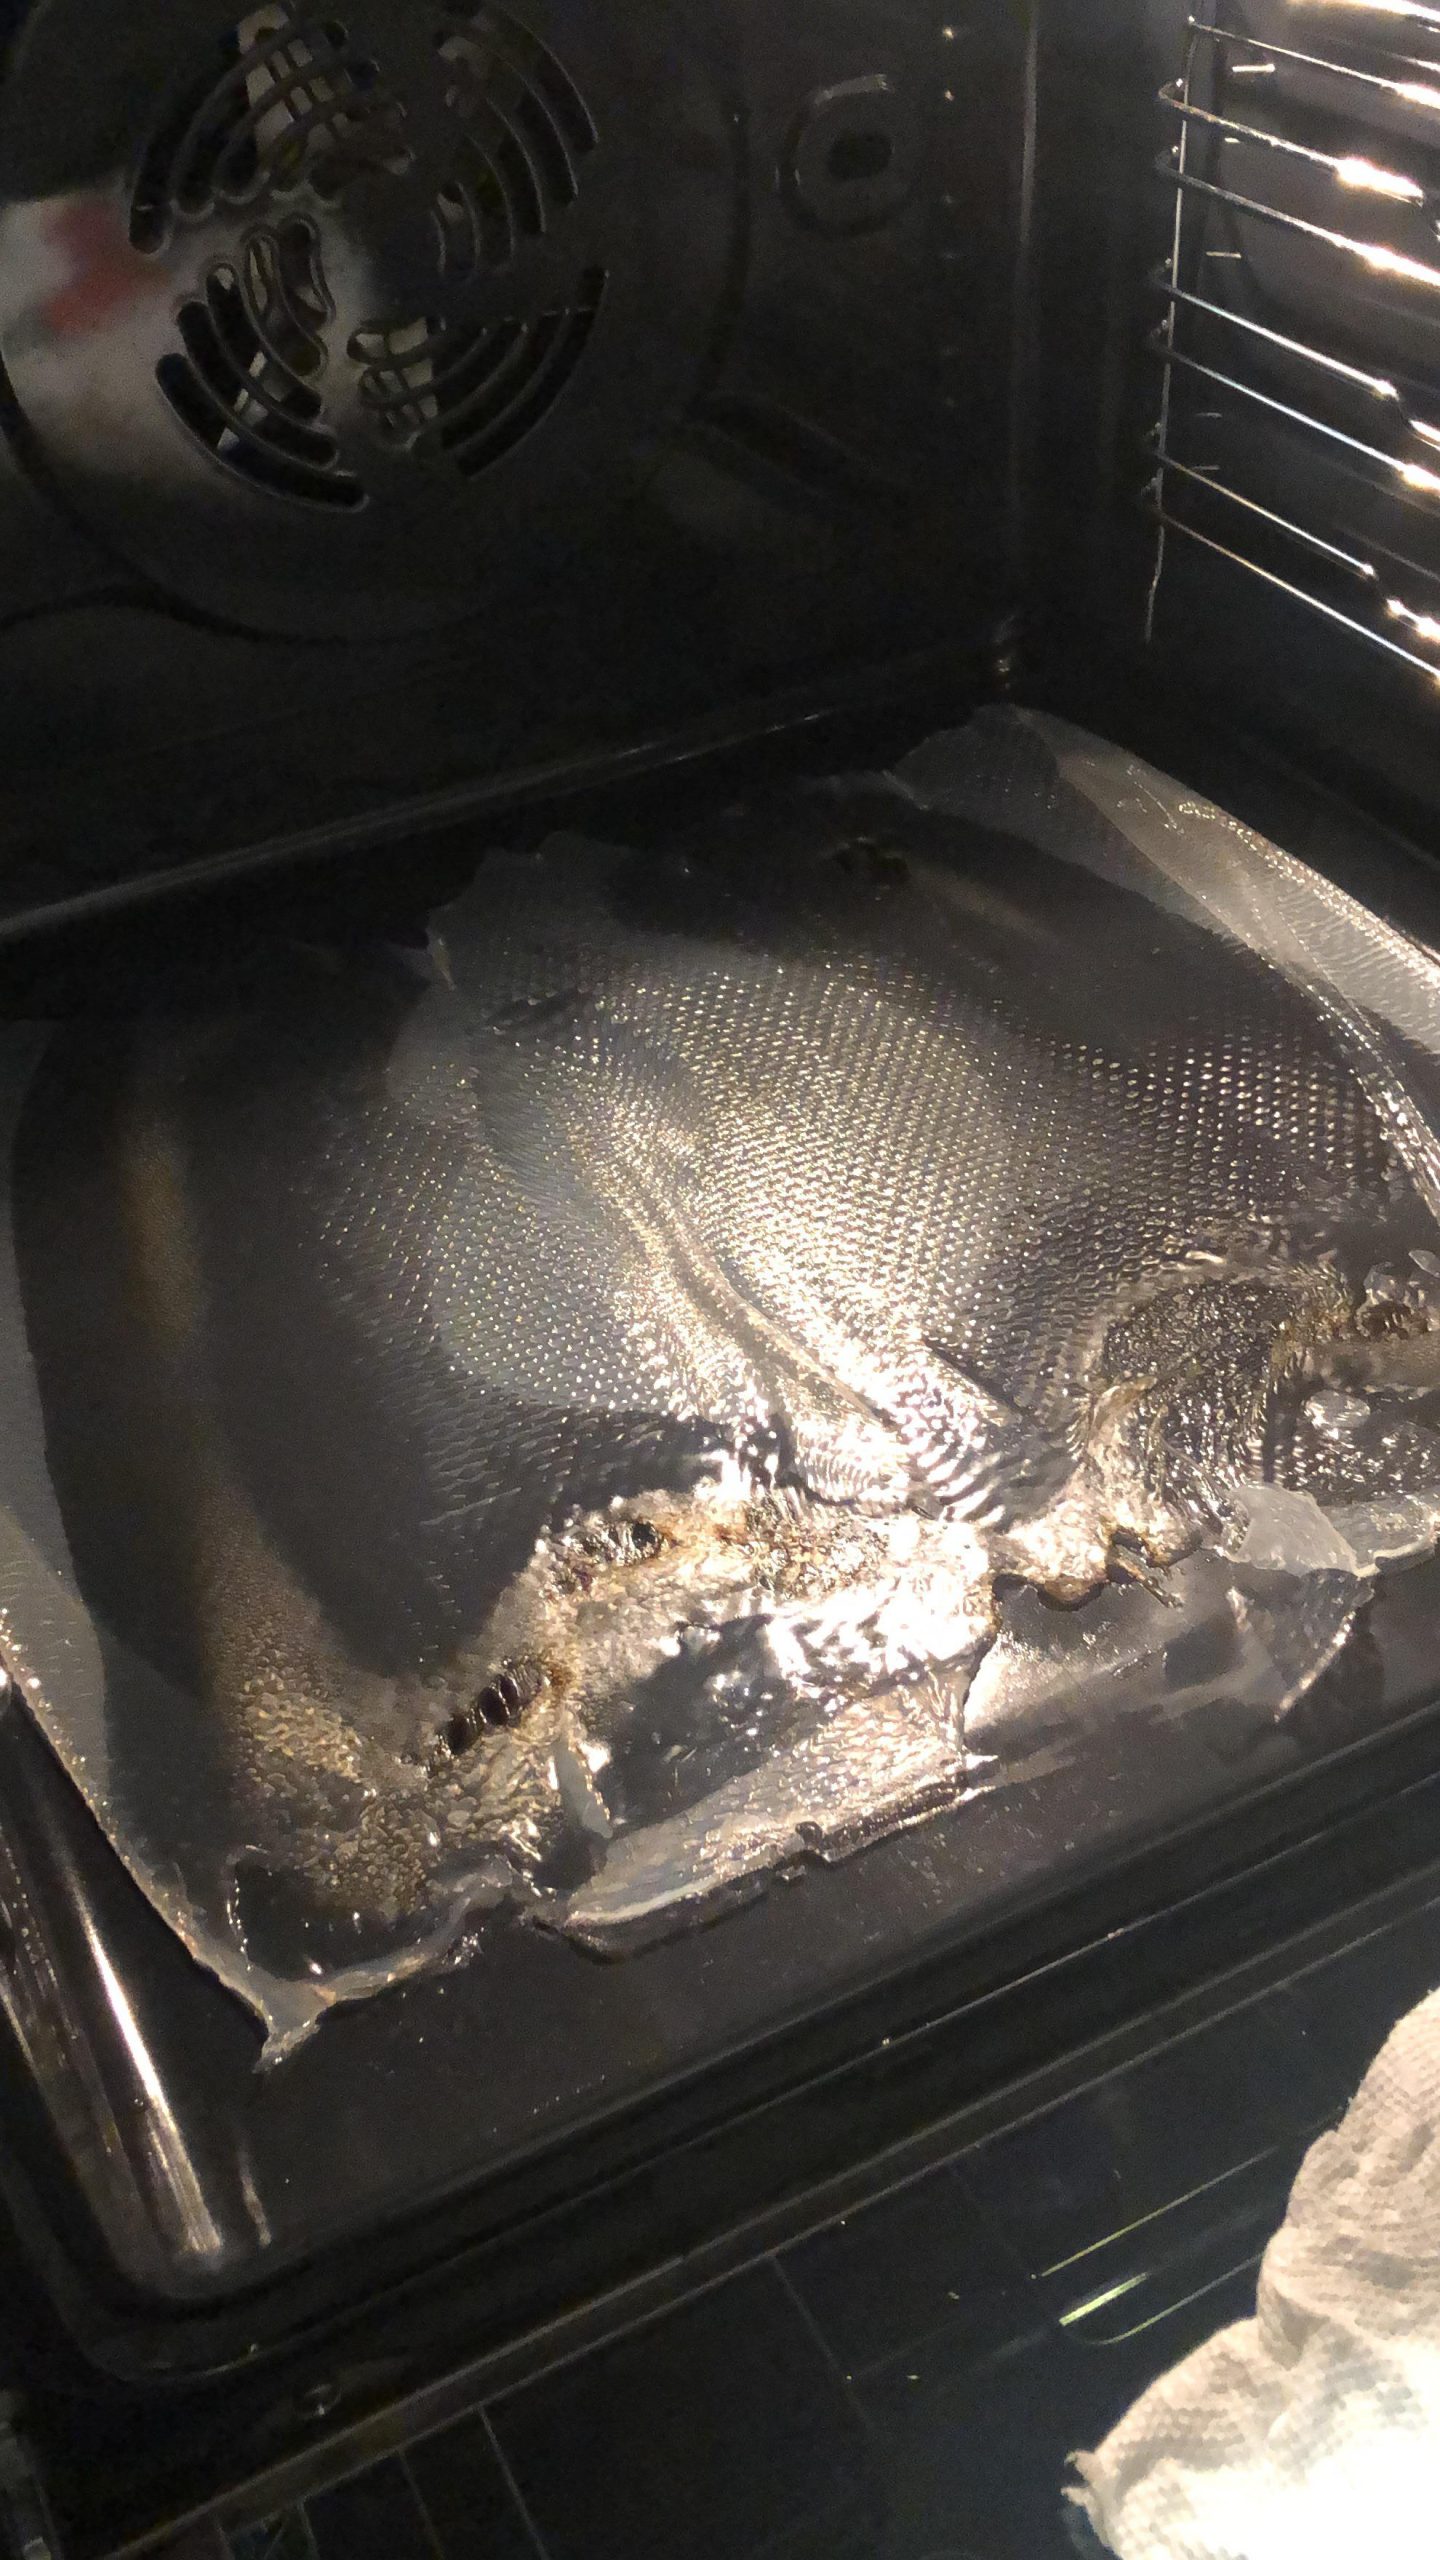 How to Clean Melted Plastic in Oven